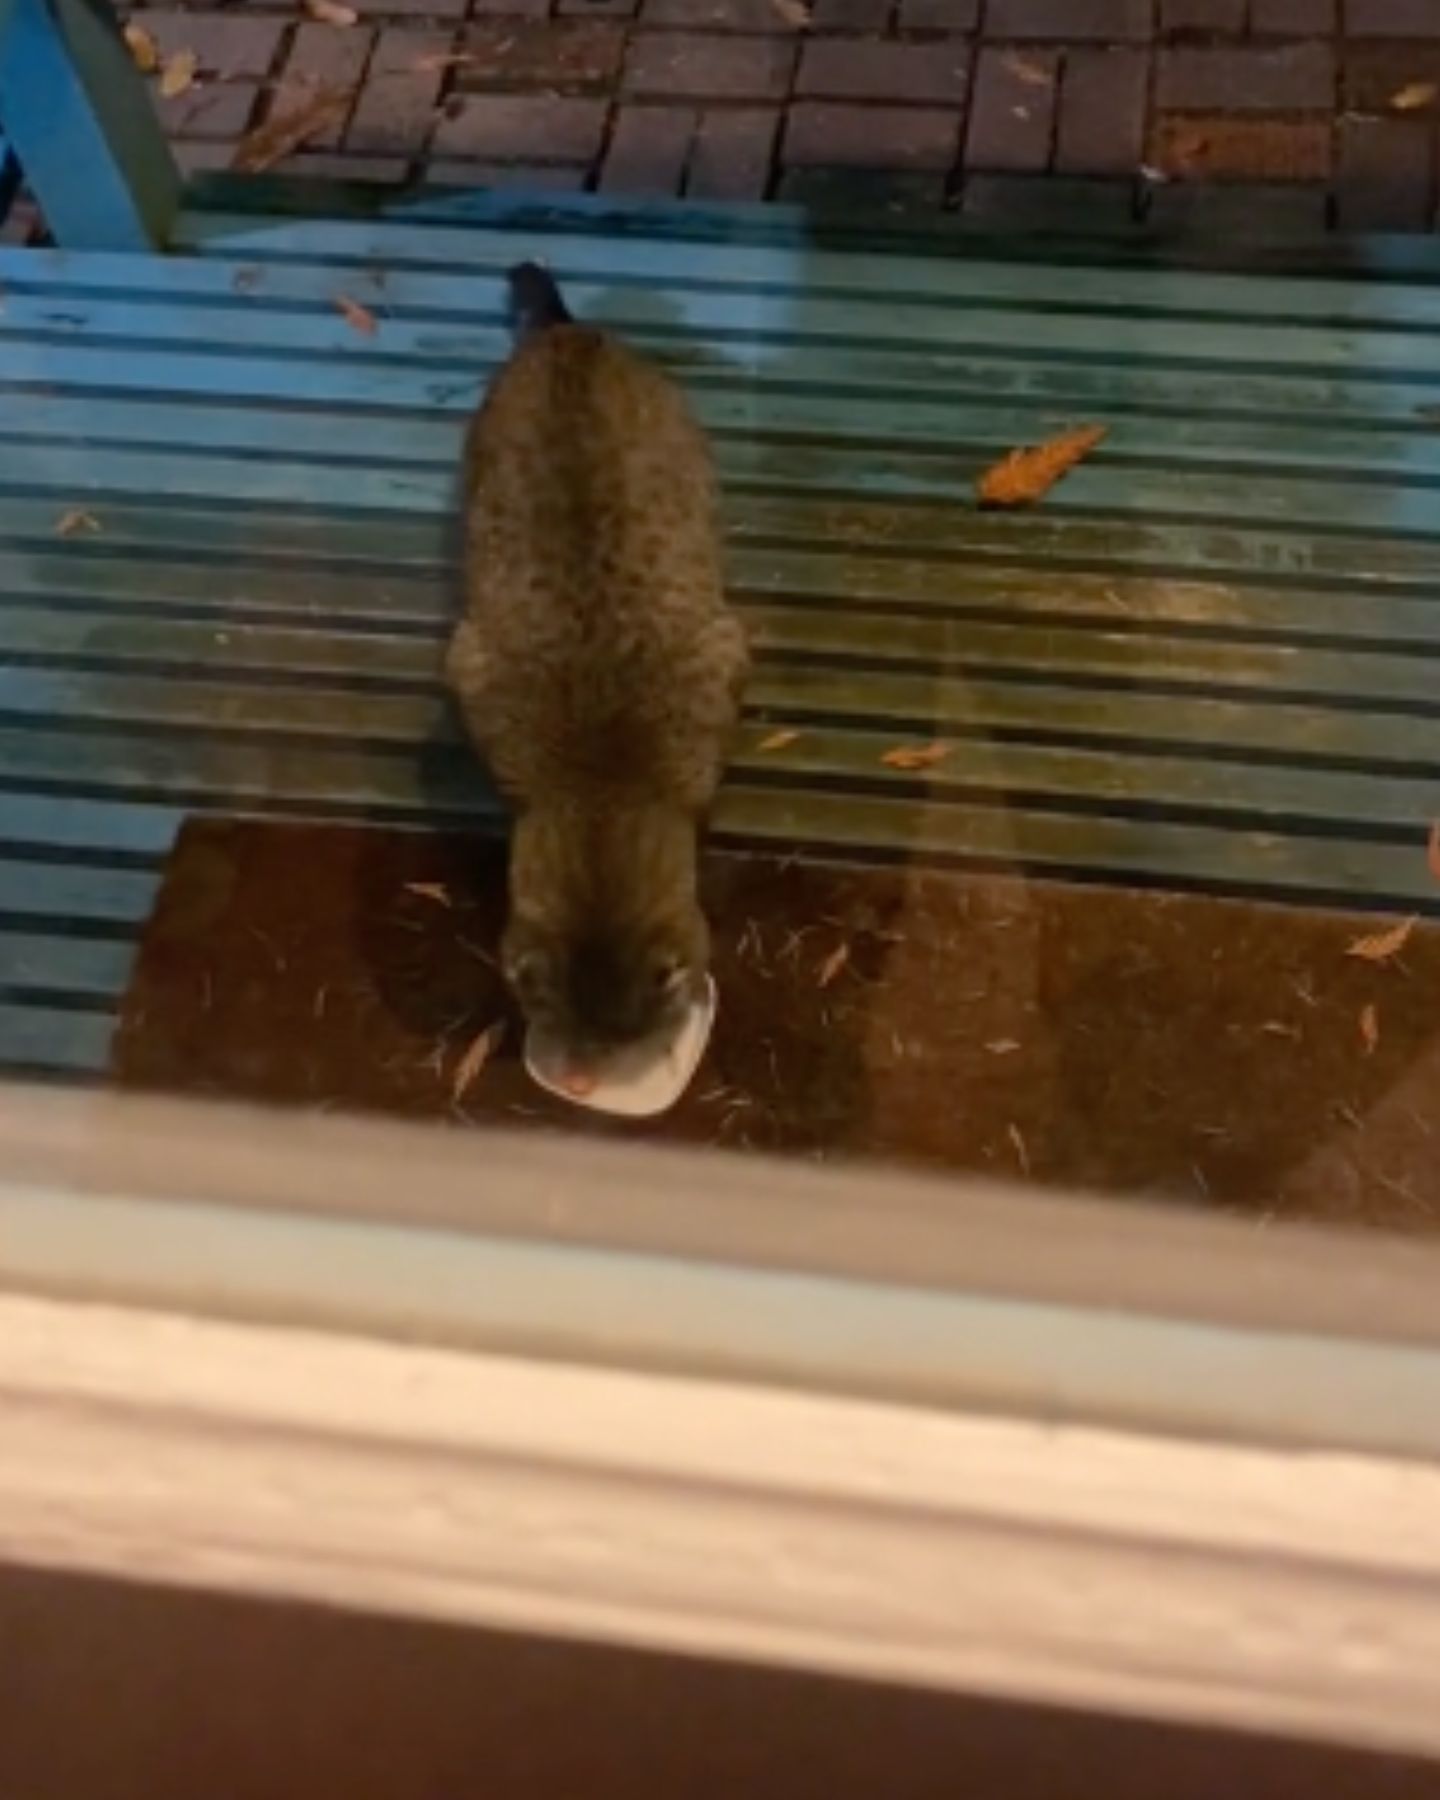 bobcat eating on a porch